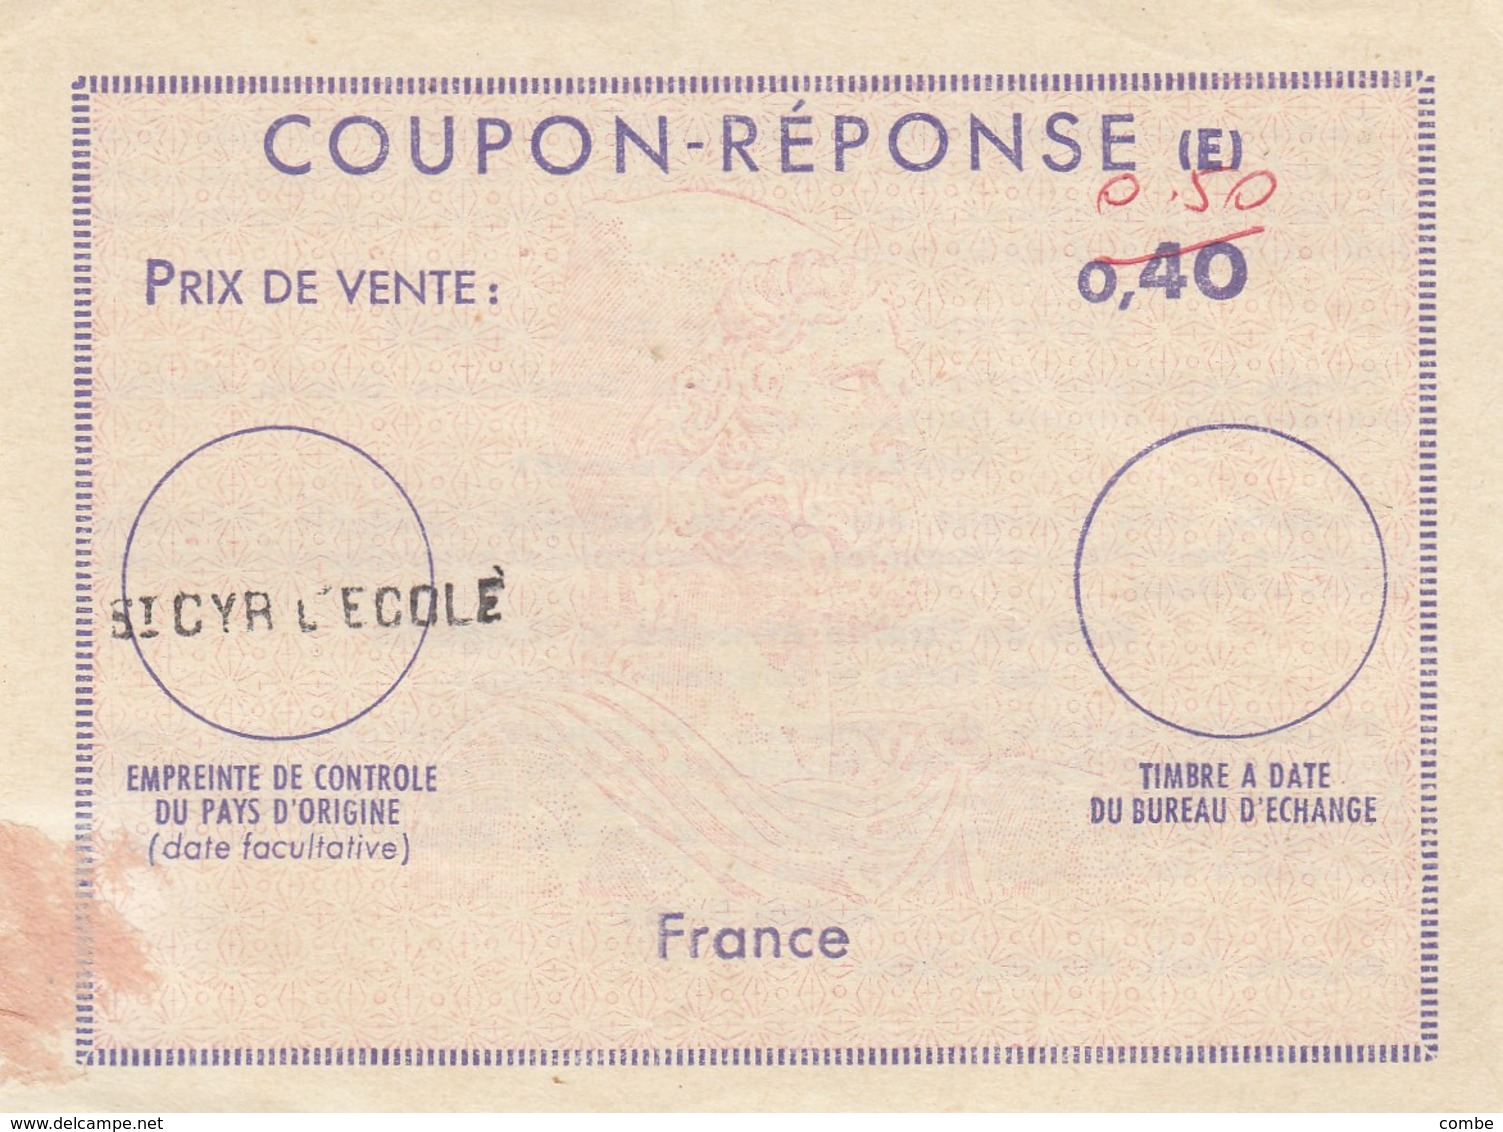 COUPON-REPONSE INTERNATIONAL. E. FRANCE. 0,40 FRANC RECTIFIE 0,50 FRANC . ST CYR-L'ECOLE      / 2 - Reply Coupons